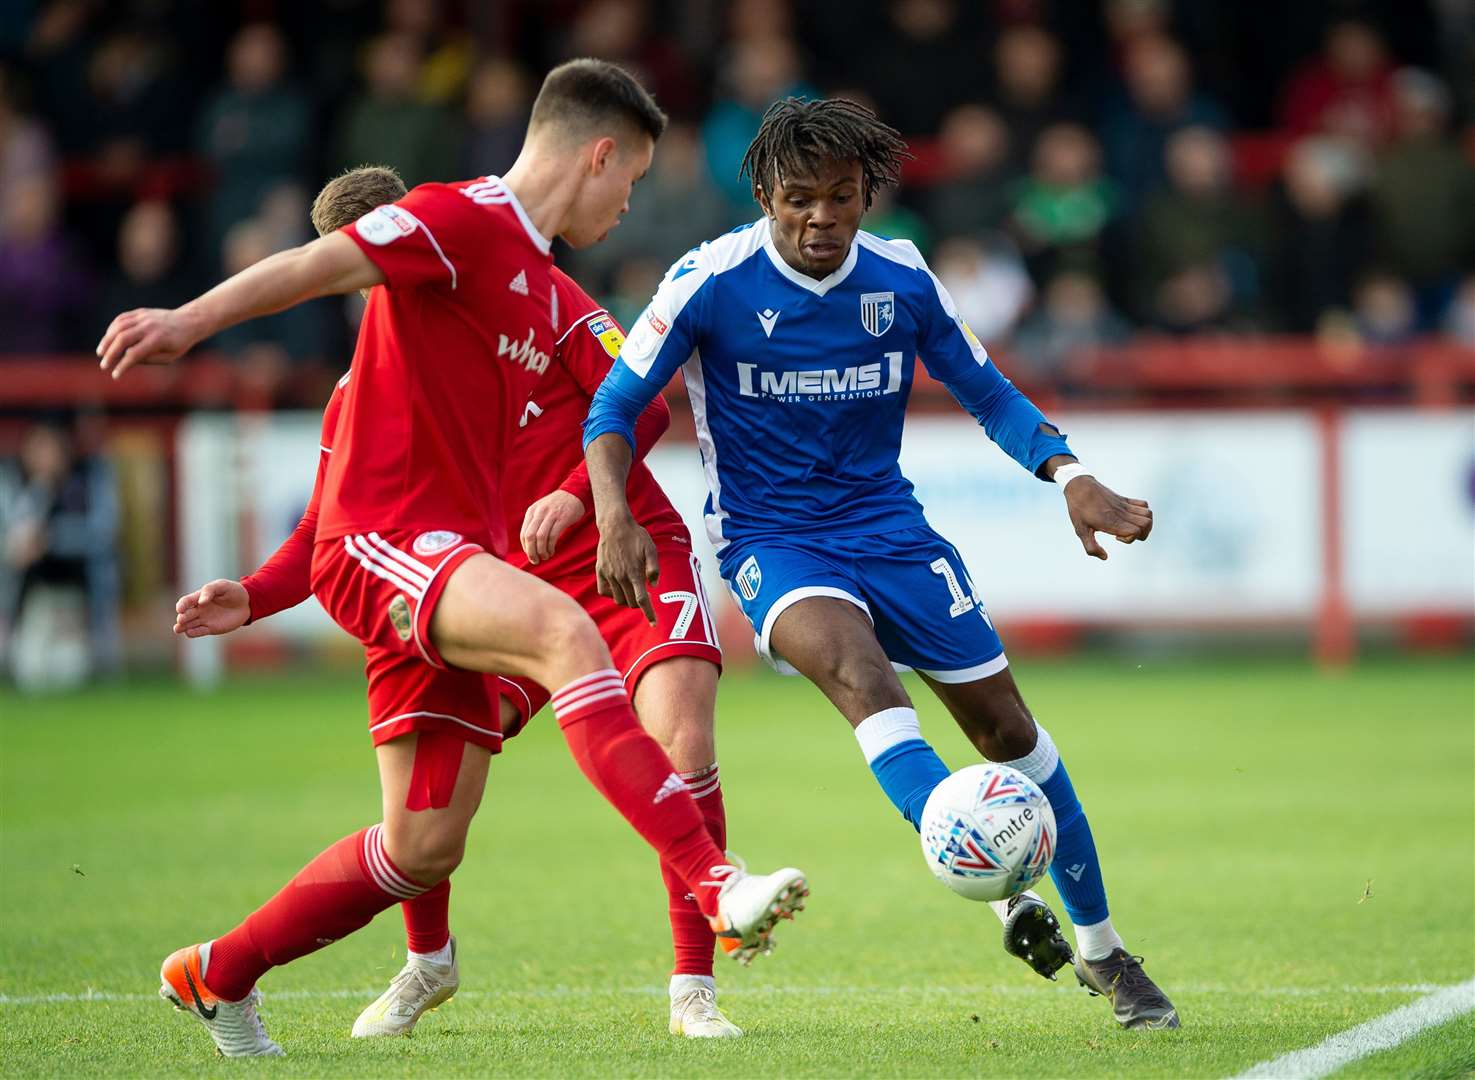 Regan Charles-Cook has been offered a new deal from the Gills